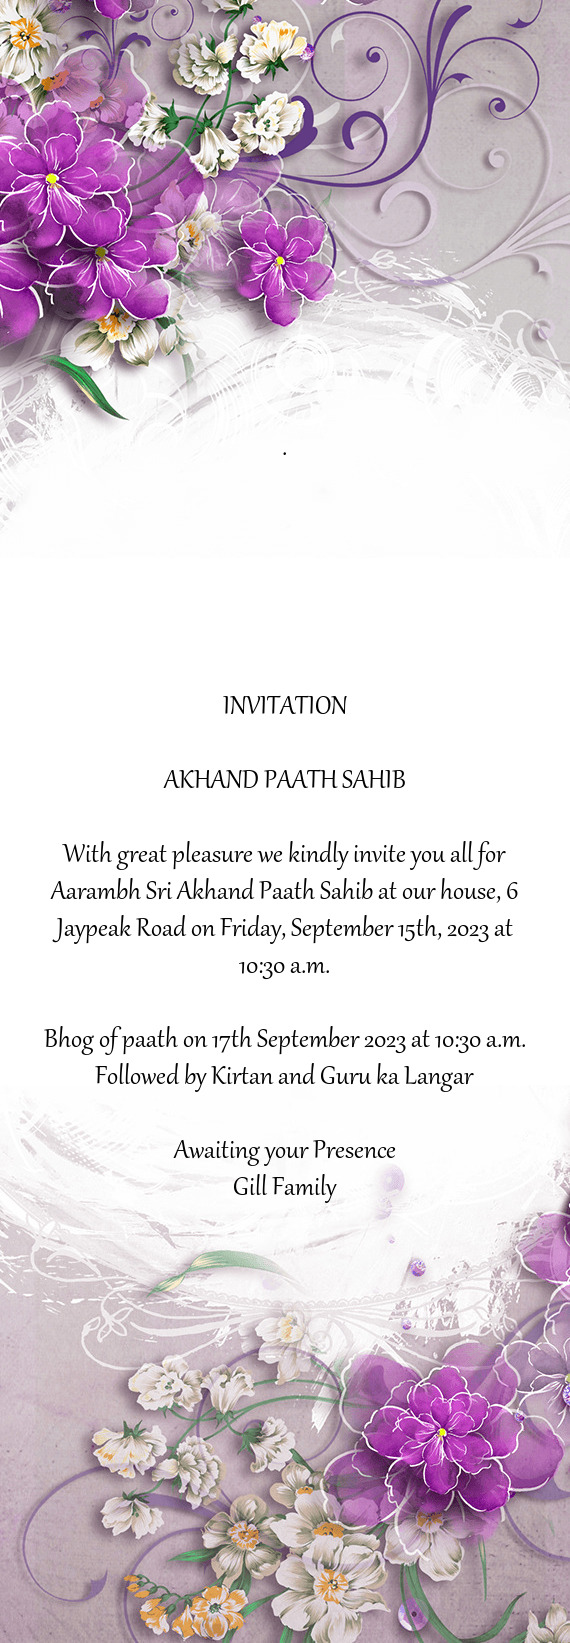 With great pleasure we kindly invite you all for Aarambh Sri Akhand Paath Sahib at our house, 6 Jayp